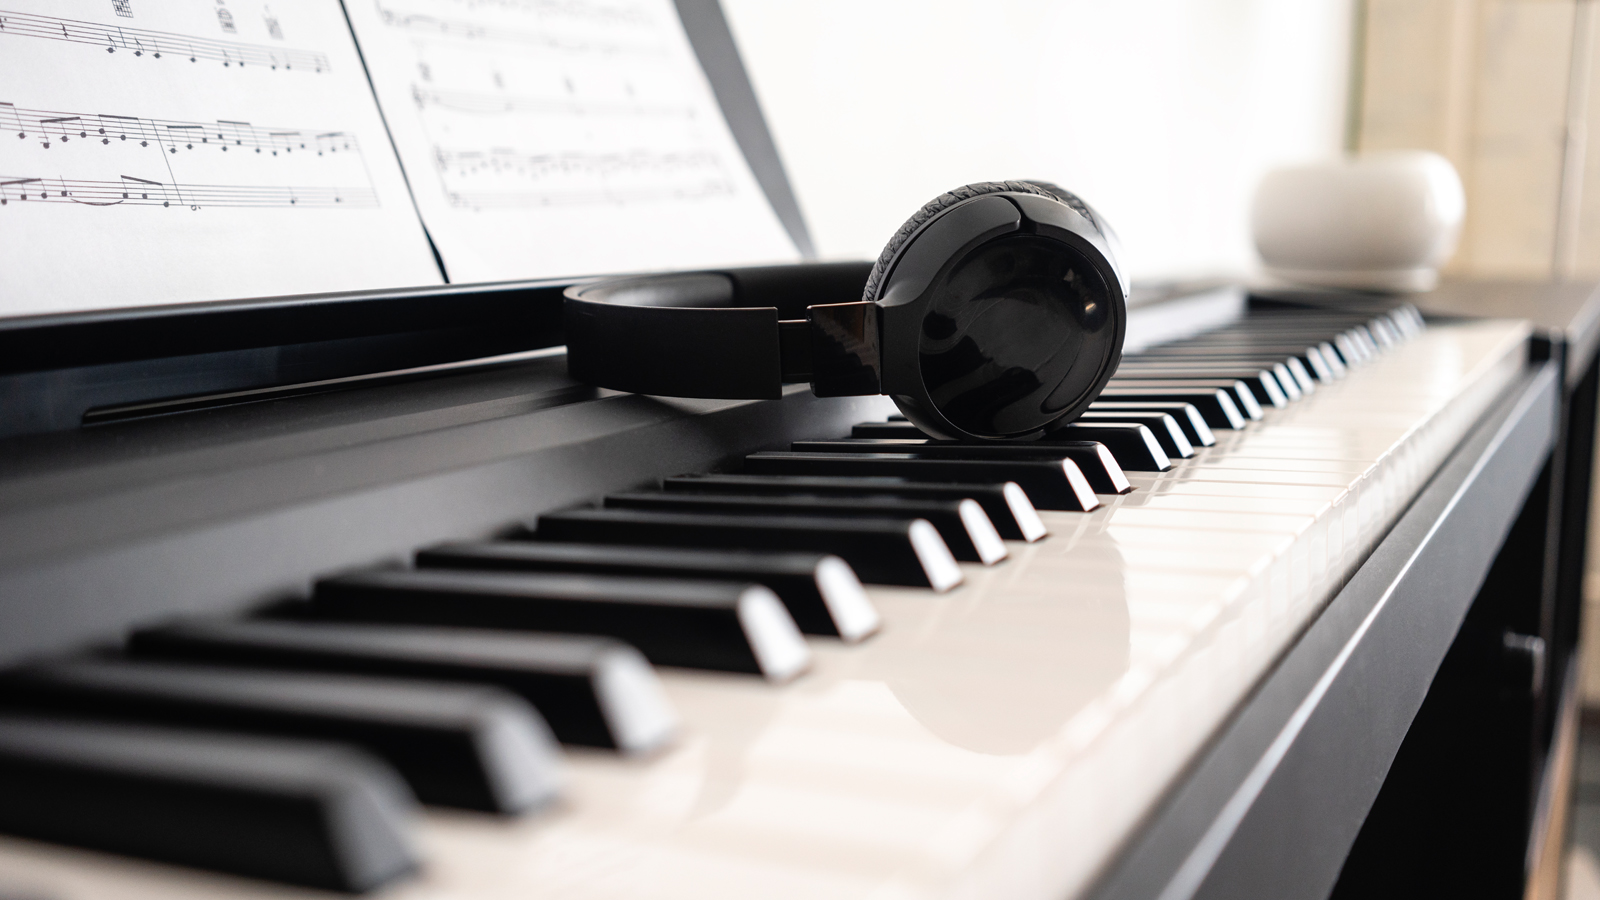 Essential piano accessories: everything you need to get started playing the piano | MusicRadar